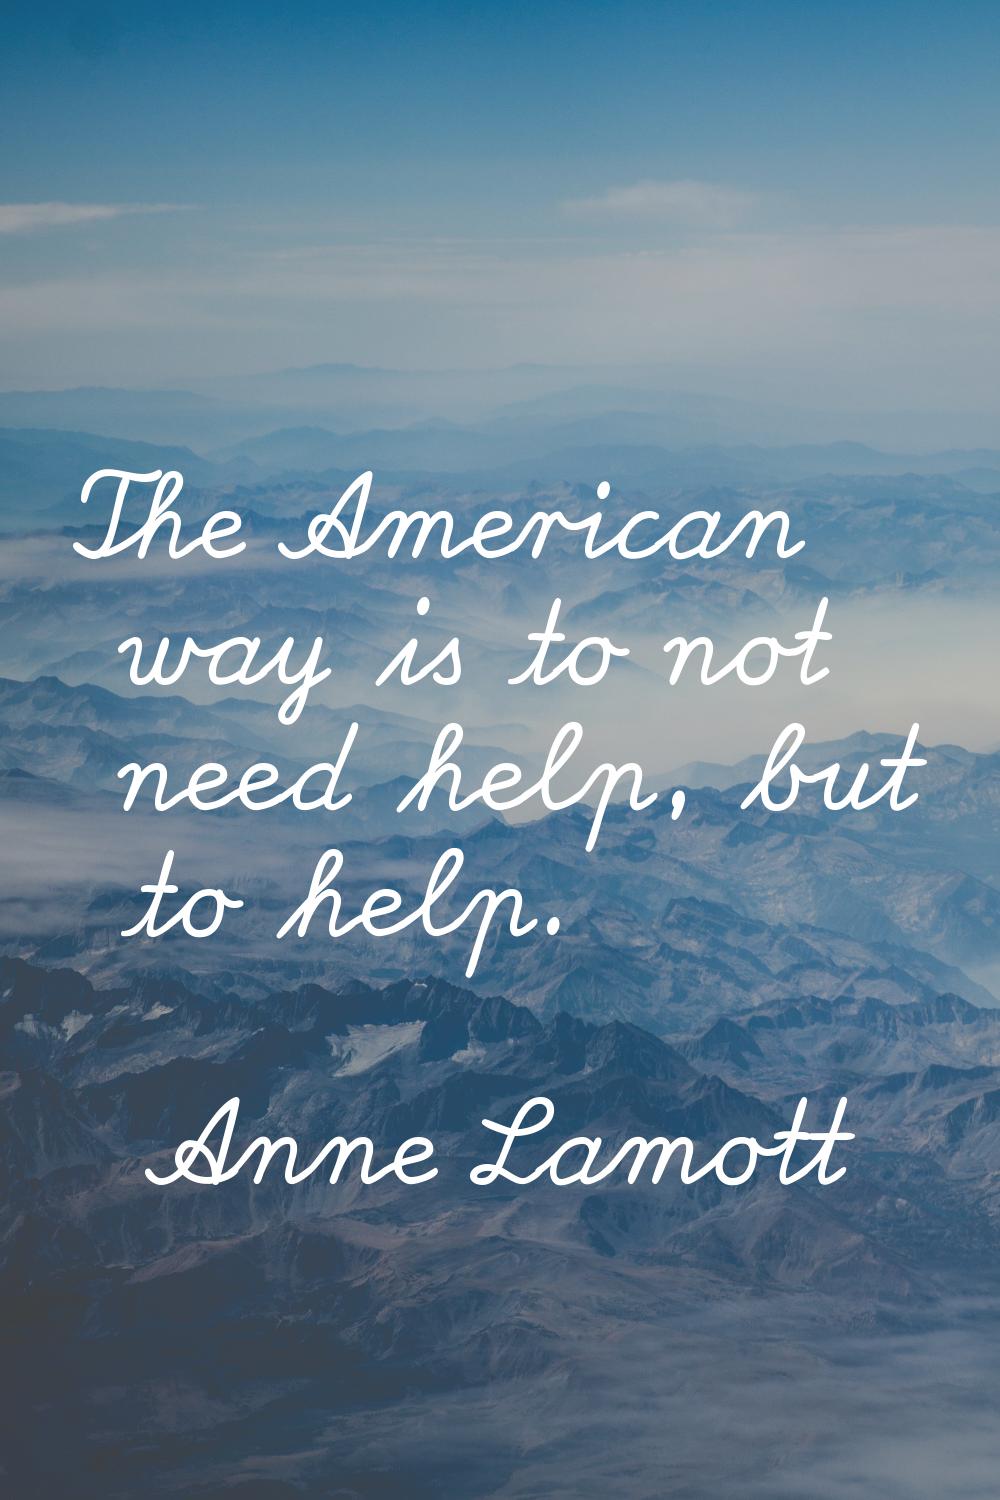 The American way is to not need help, but to help.